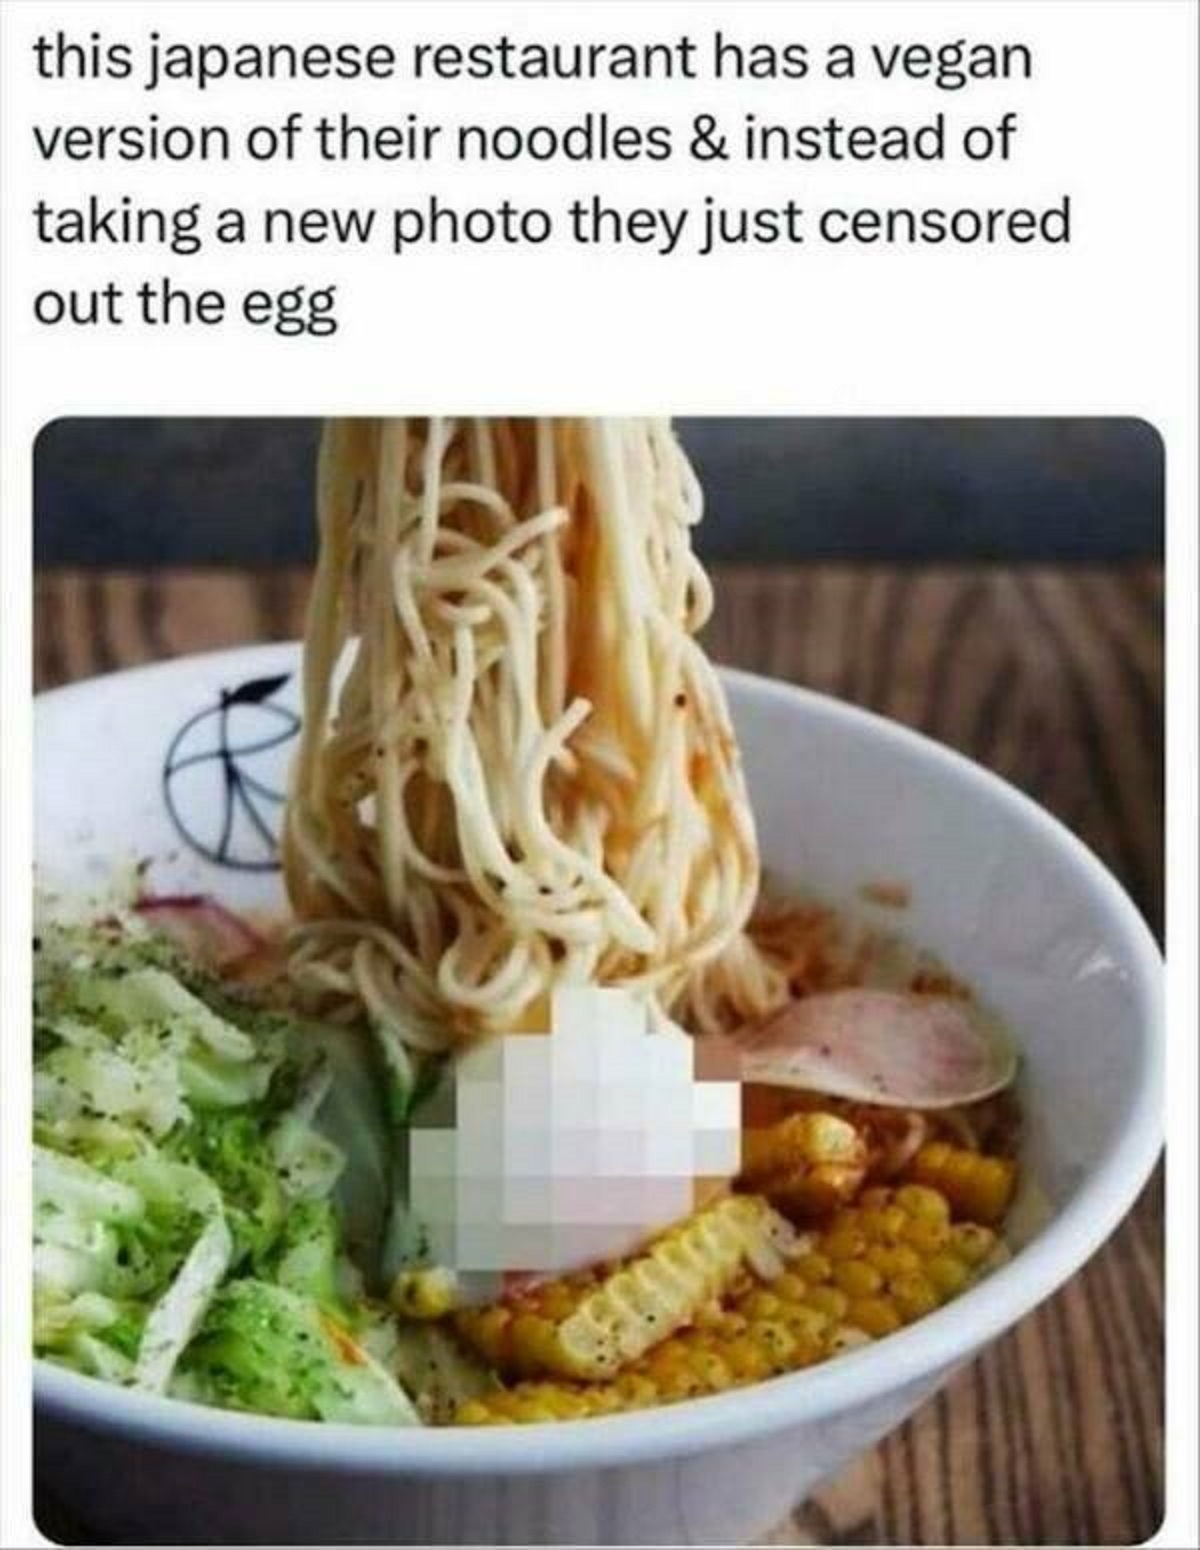 ramen egg censored - this japanese restaurant has a vegan version of their noodles & instead of taking a new photo they just censored out the egg